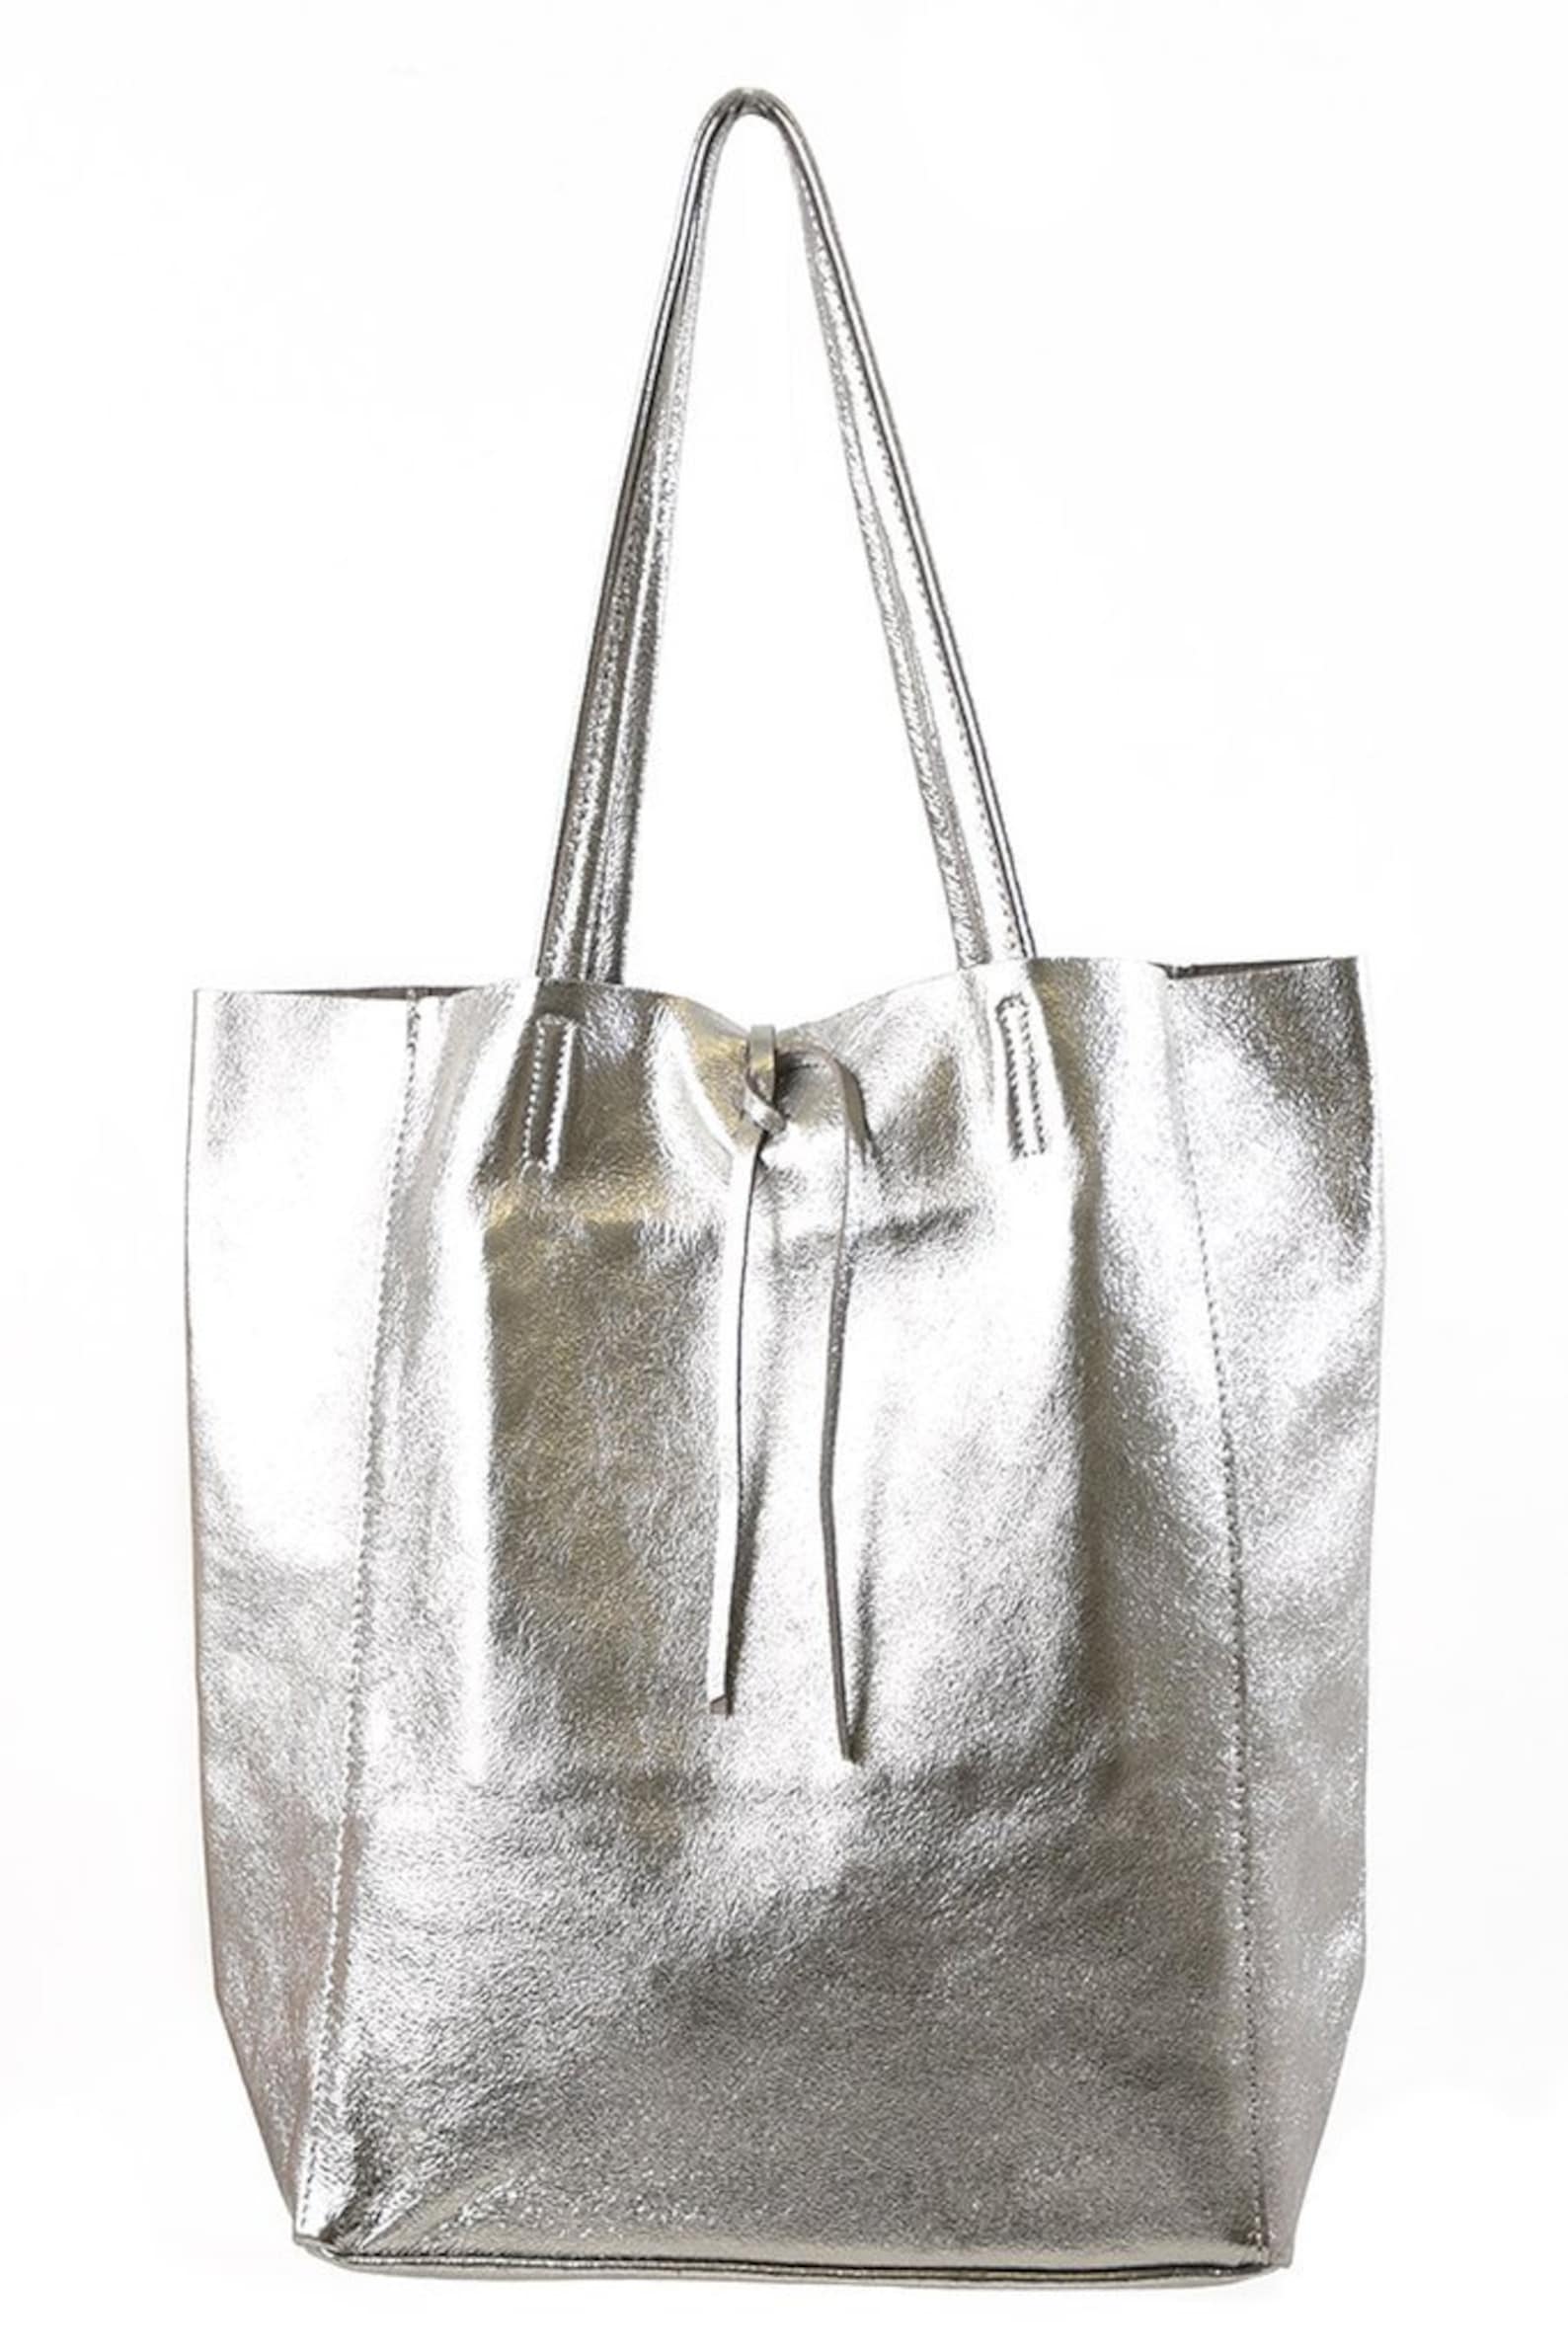 Silver Metallic Leather Tote Bag | Etsy